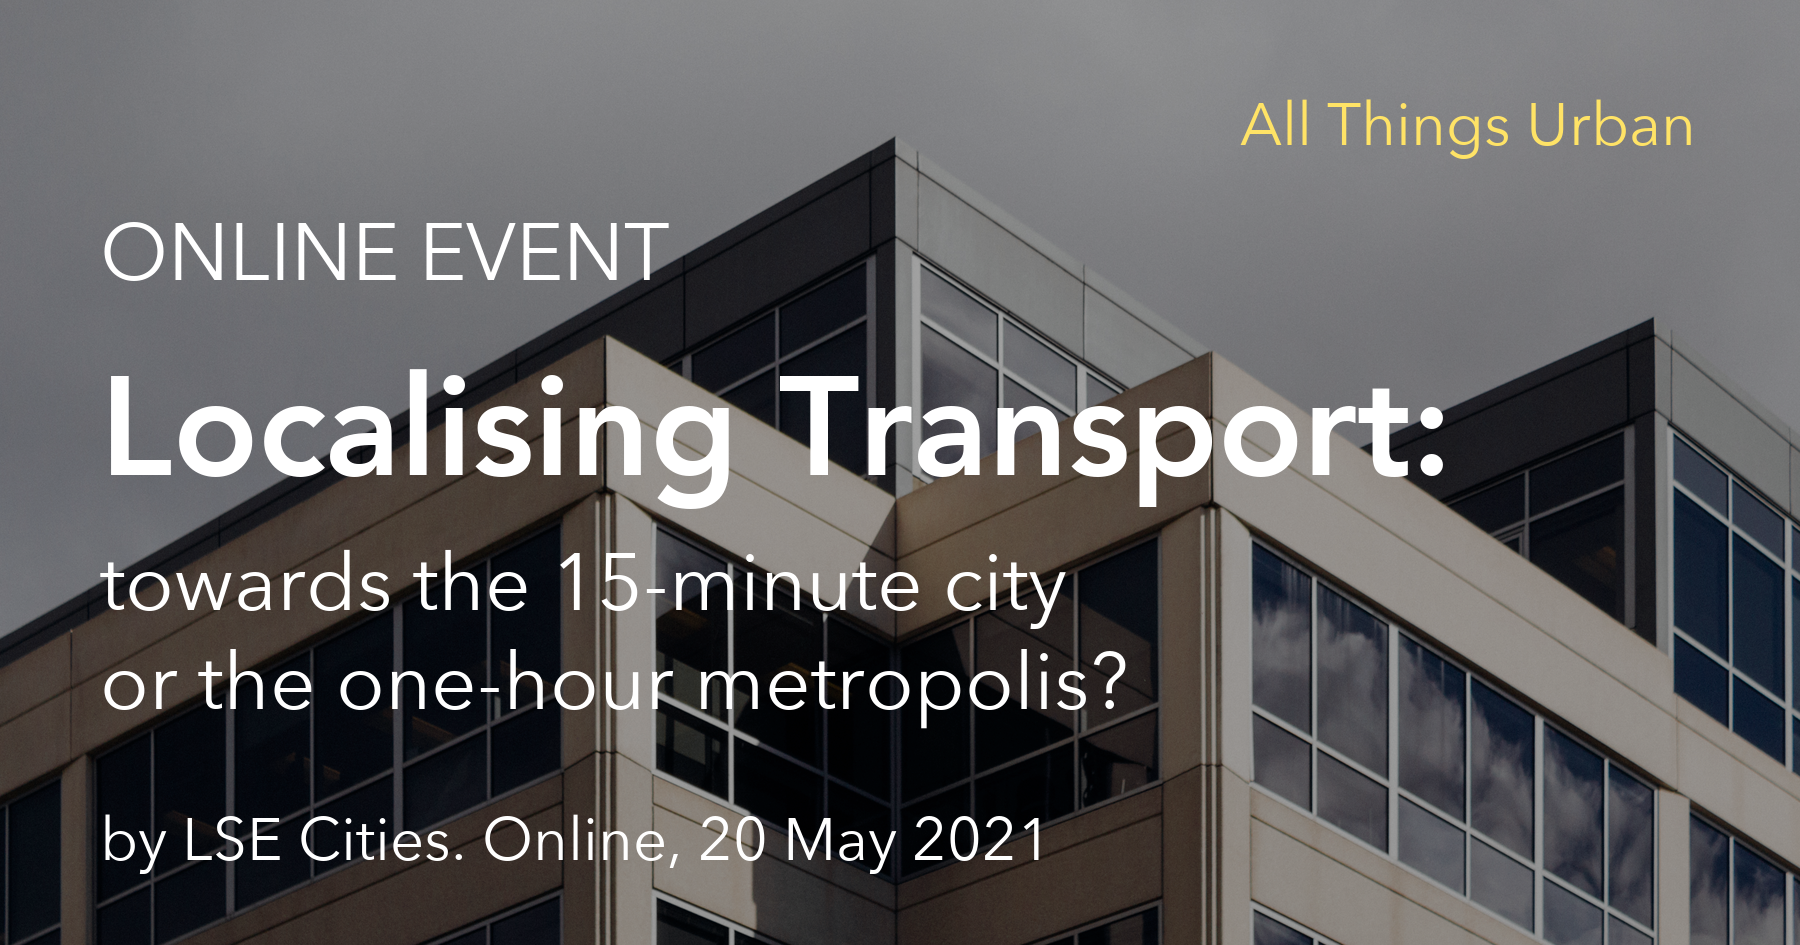 Localising Transport: towards the 15-minute city or the one-hour metropolis?